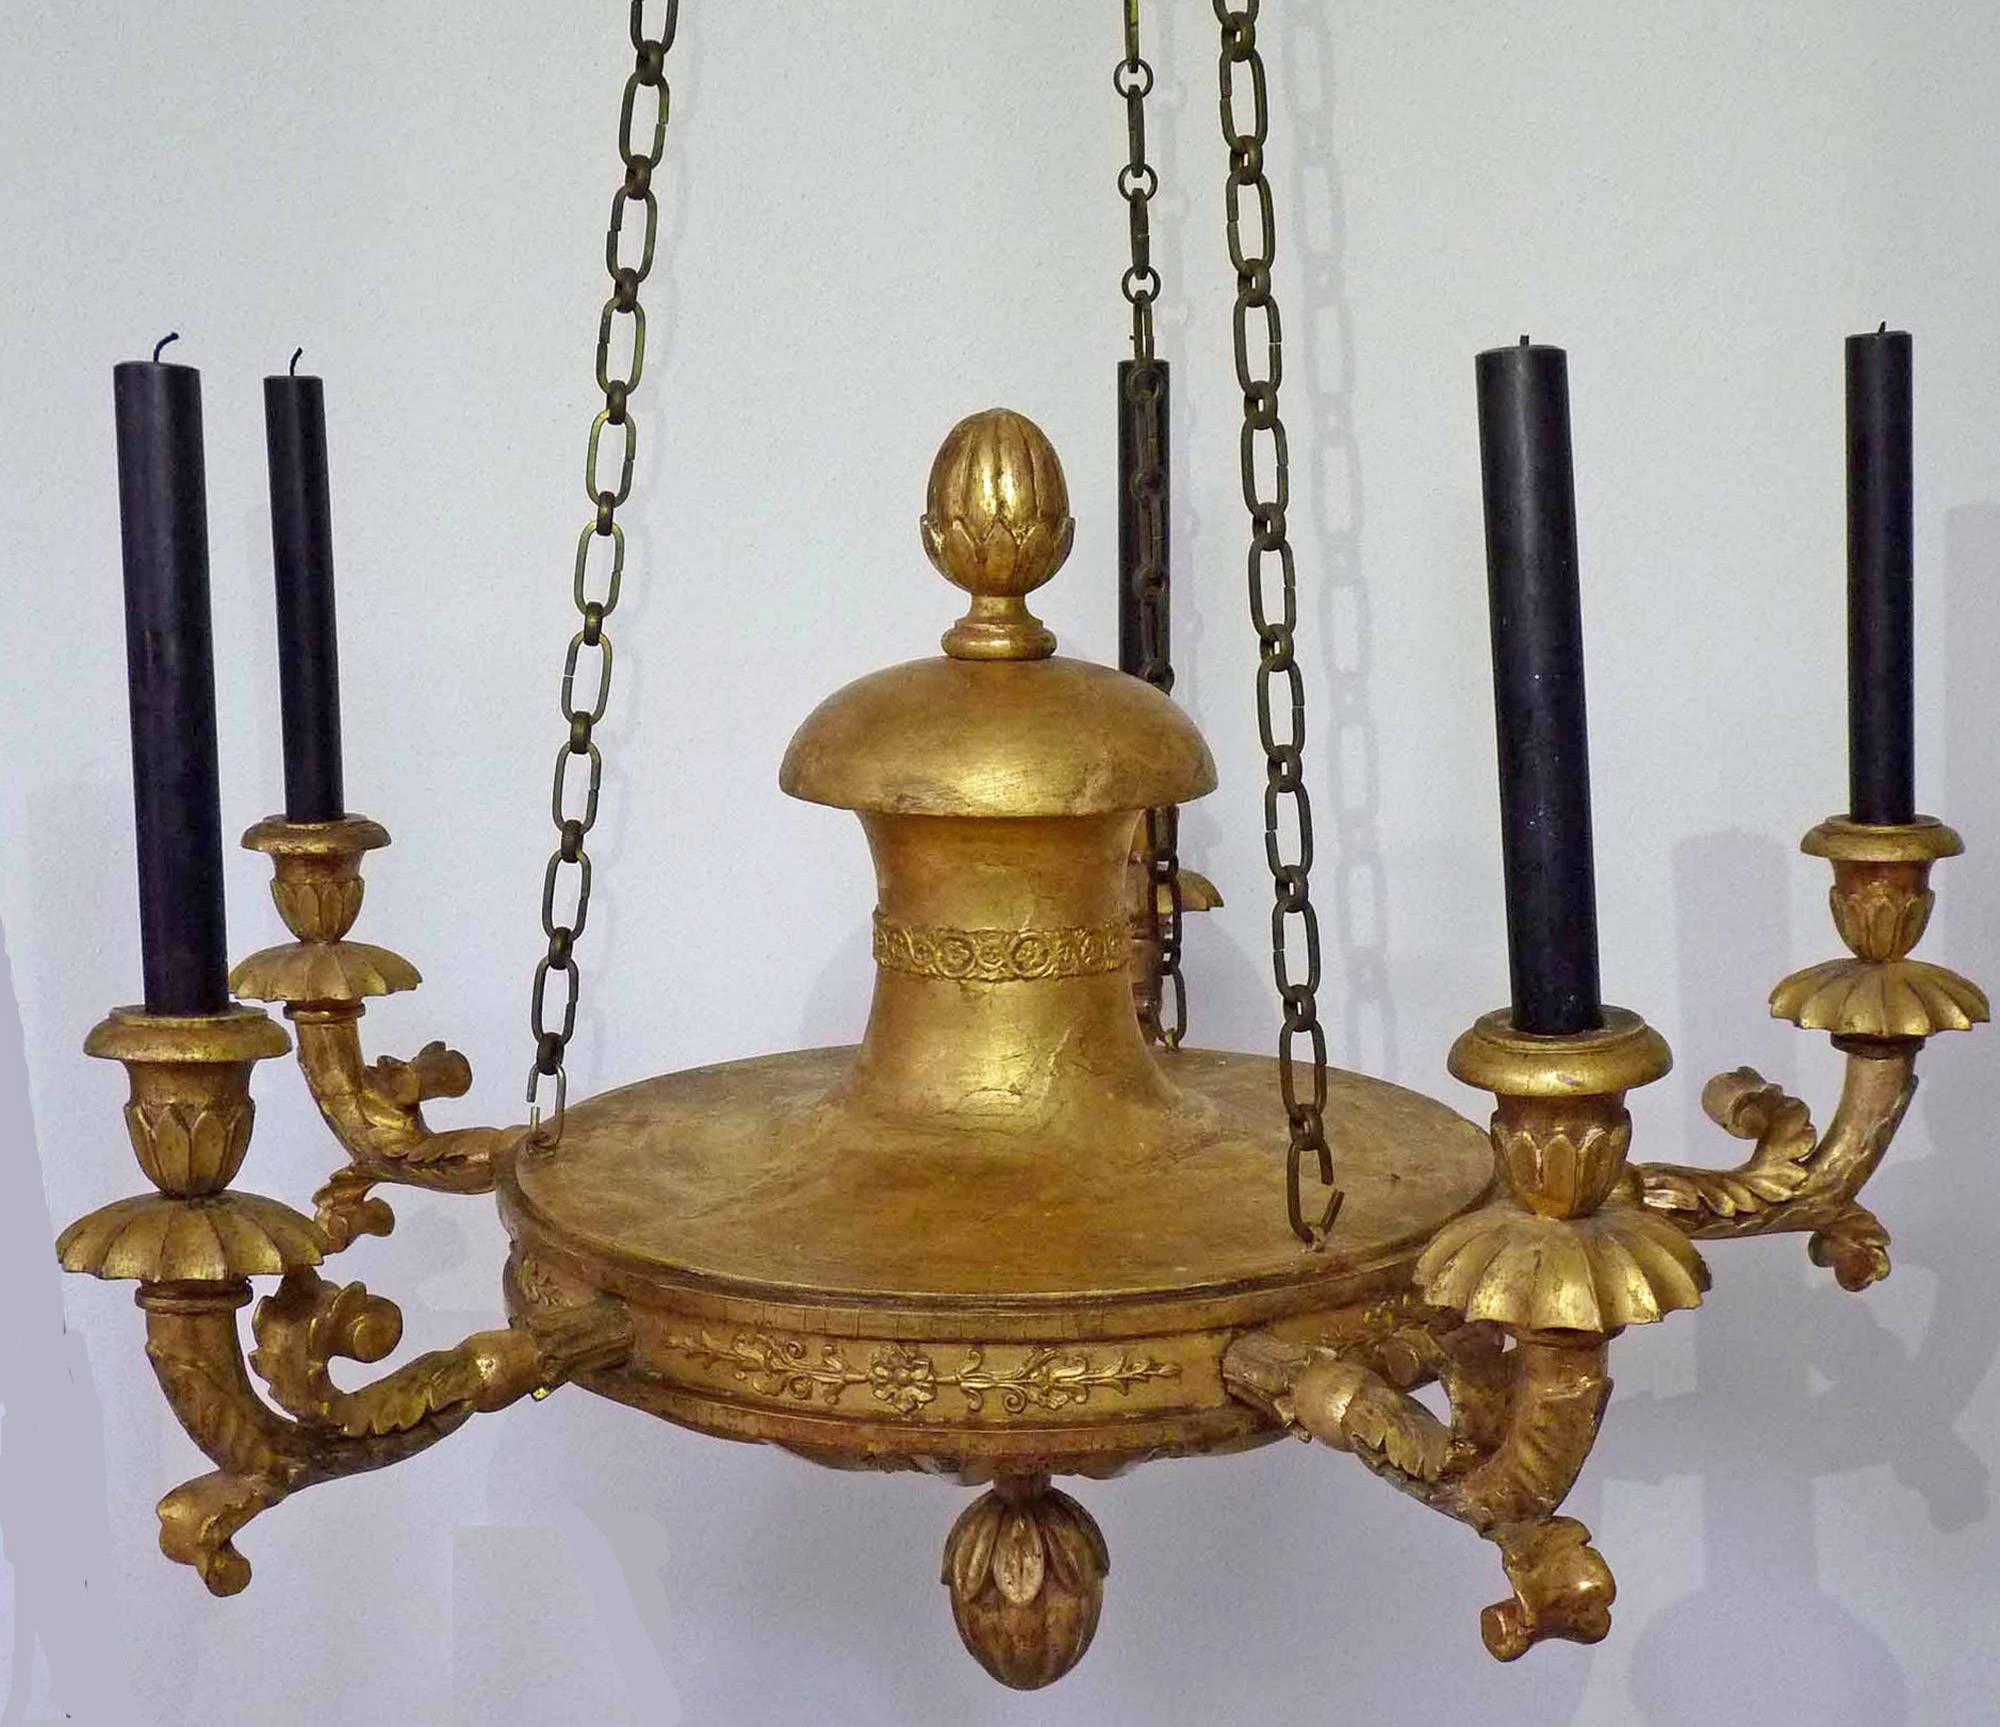 Five armed Ceiling lamp, Hand carved wood, leaf gilt, Germany c.1820 - Art by Unknown